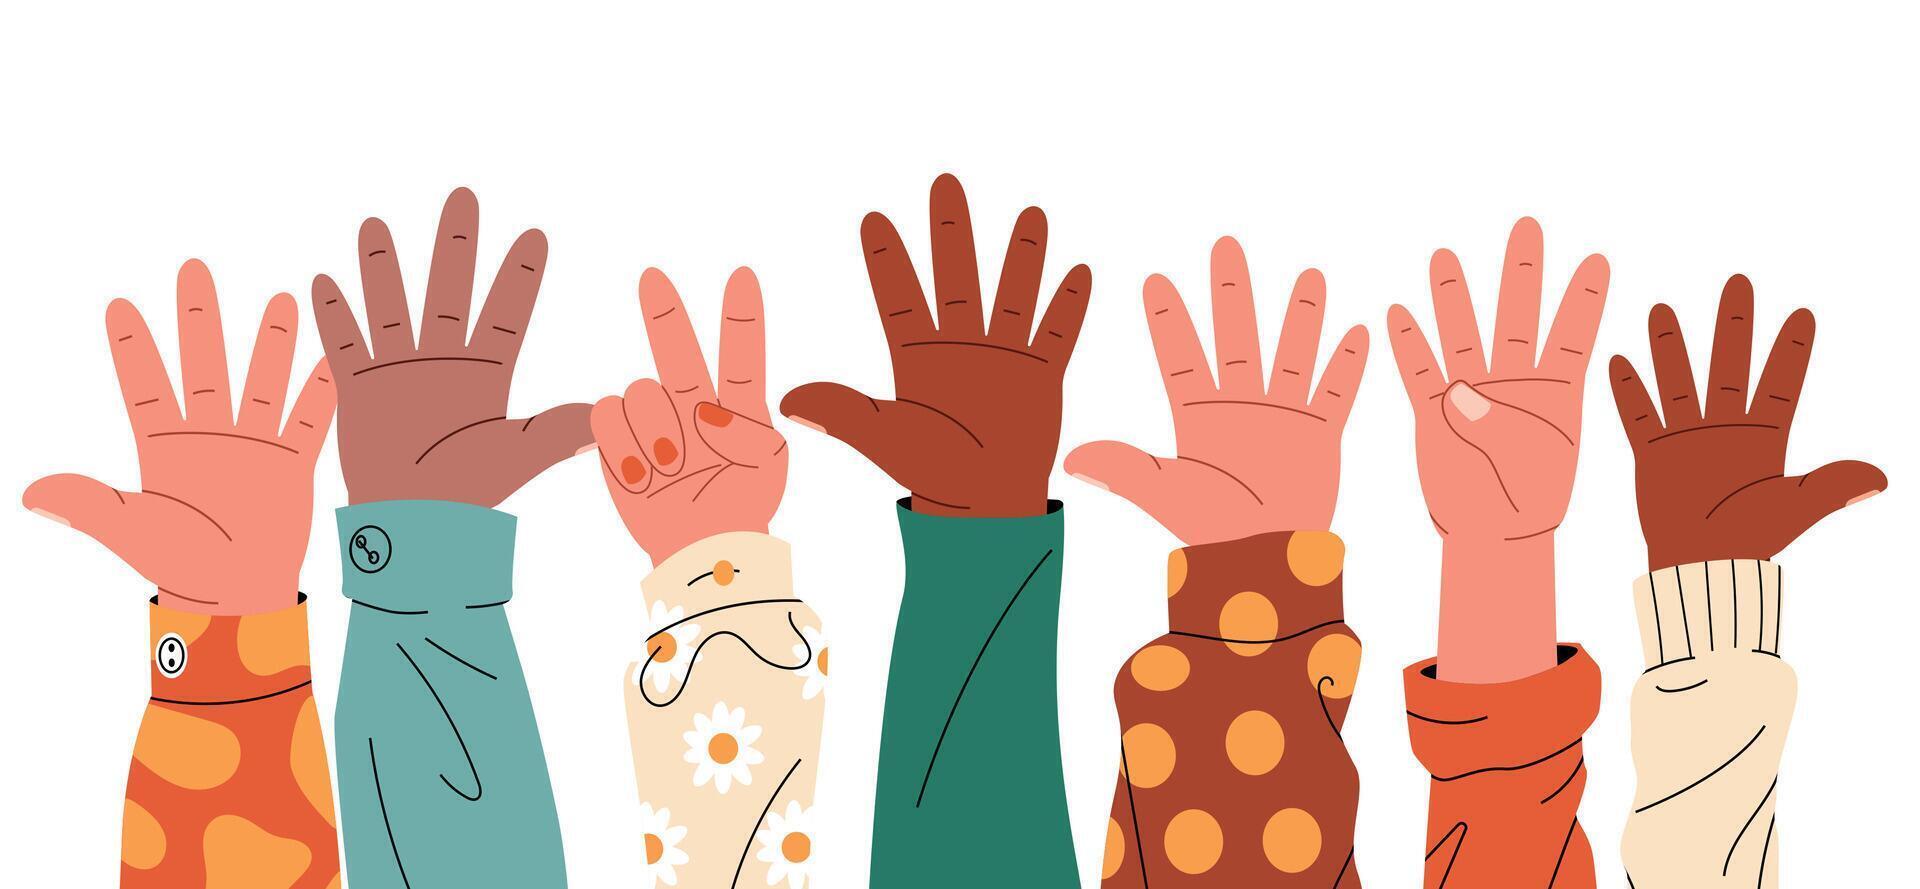 Raised hands. Cartoon human palms with different gestures, group of diverse people arms rising together volunteer community concept. Vector flat banner